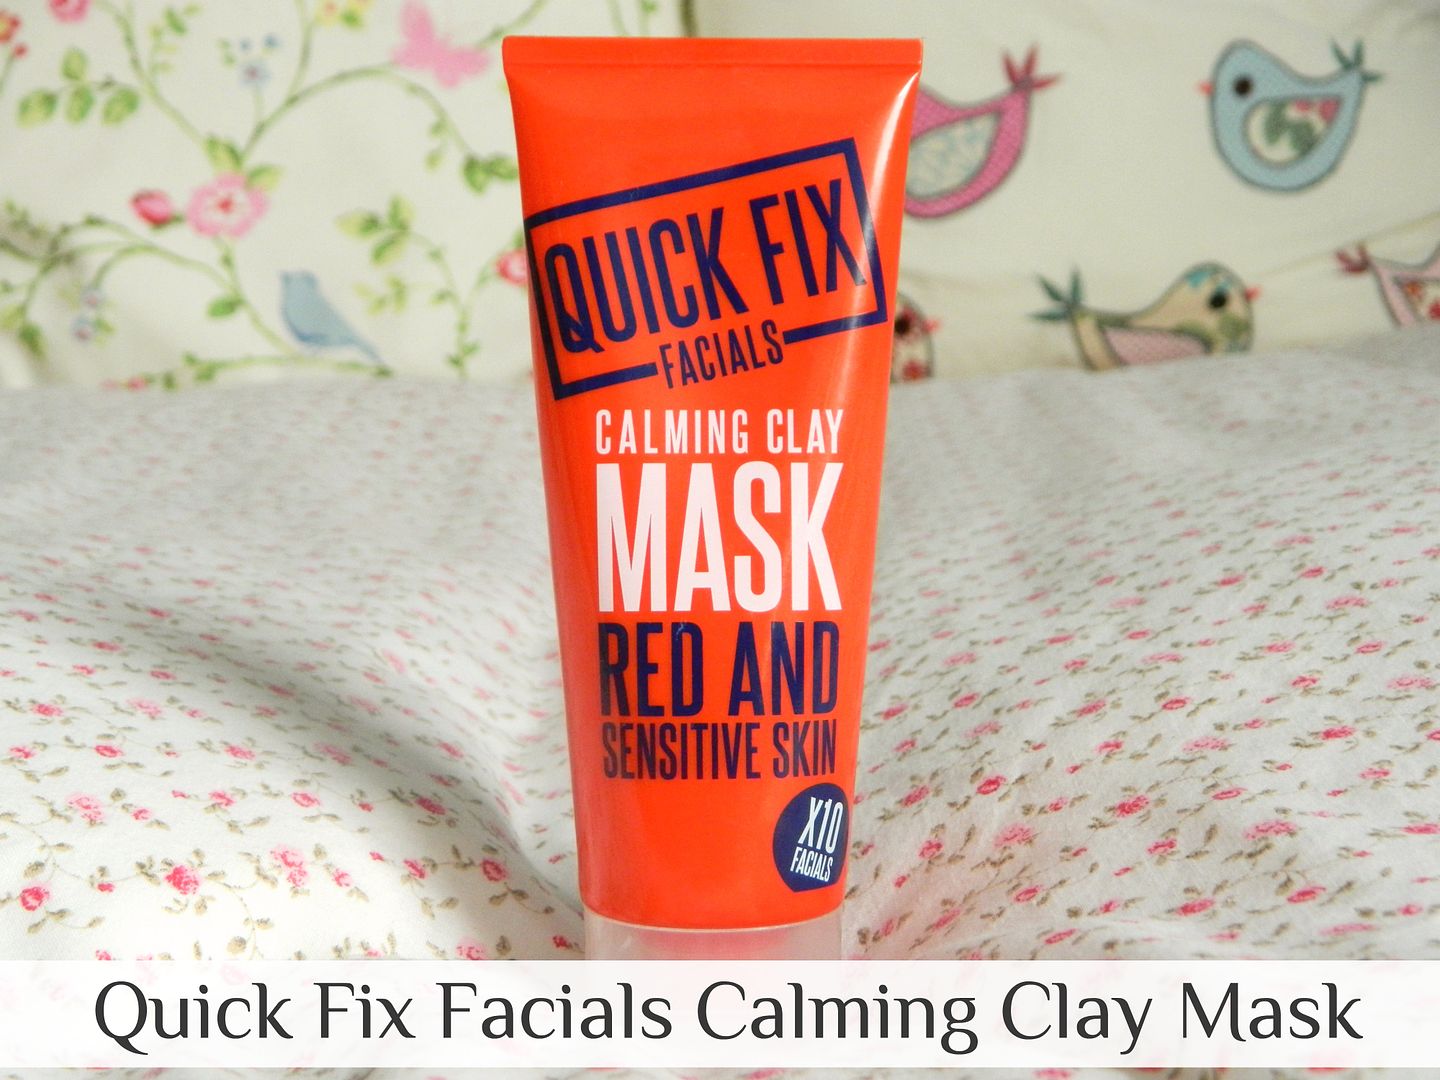 Quick Fix Facials Calming Clay Mask Red And Sensitive Skin Review Belle-Amie UK Beauty Fashion Lifestyle Blog